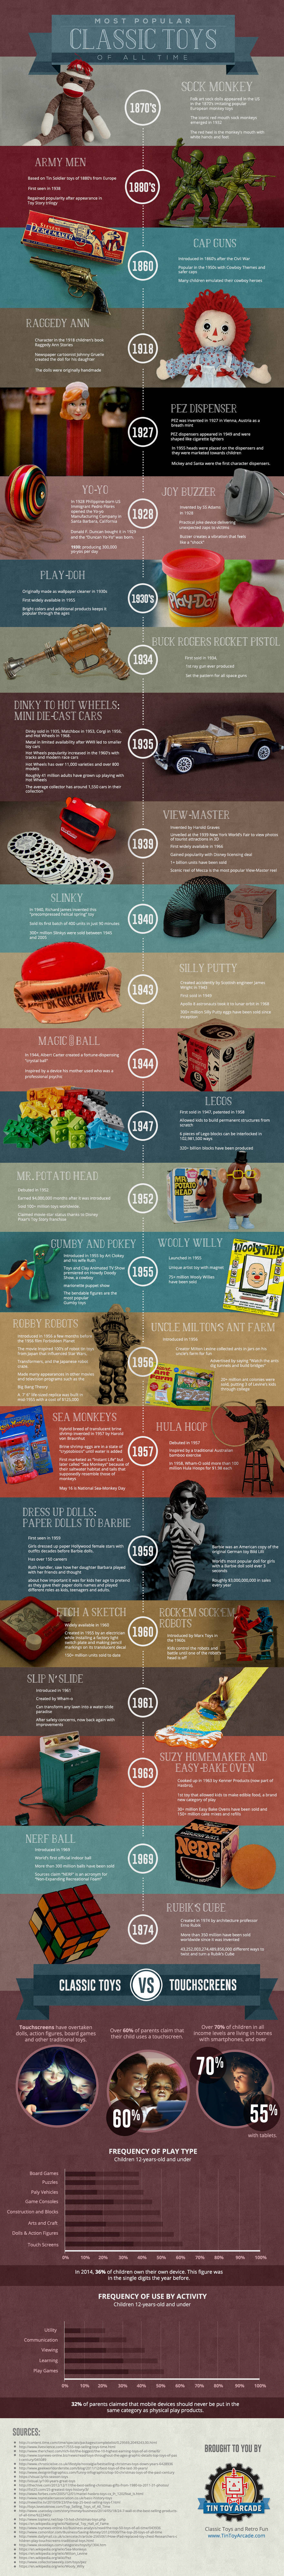 Popular Classic Toys of the Past 150 Years Infographic